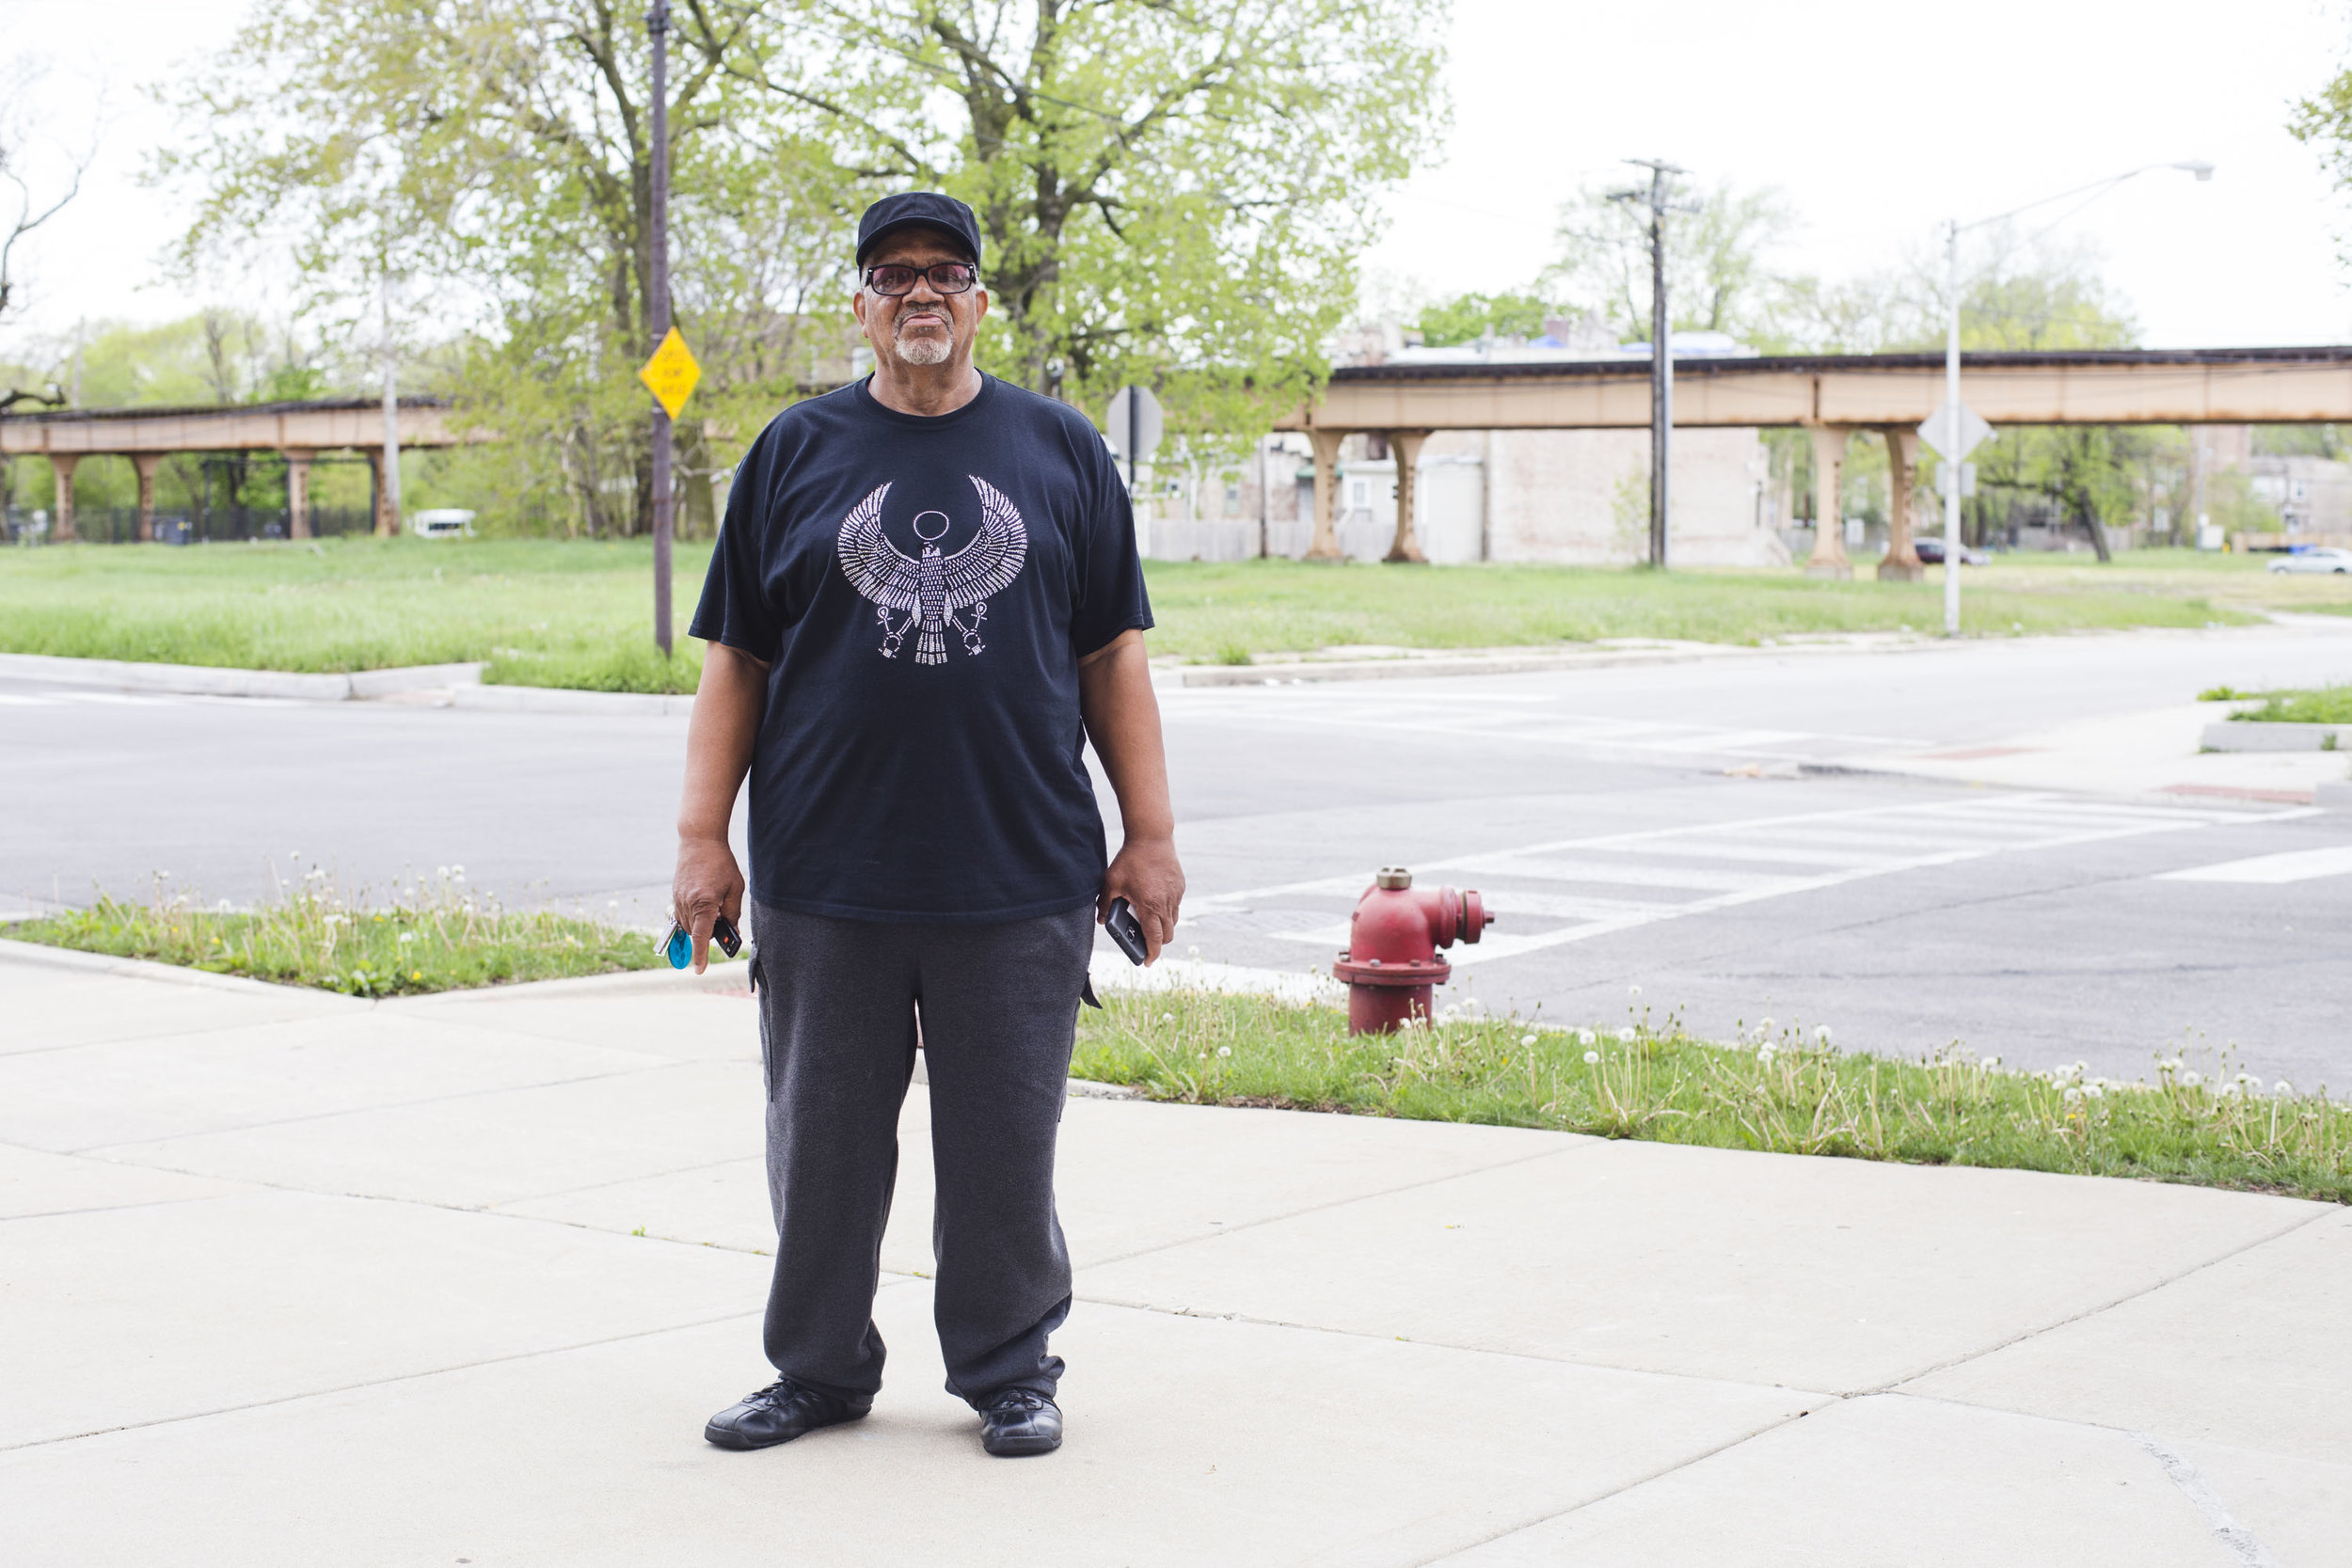  Rashid C., 72, used to live in a senior building at 42nd and Cottage Grove, which according to him, was infested with rats, bed bugs and cockroaches. Now he lives in Washington Park, a few blocks away from where he was born. He says the neighborhood